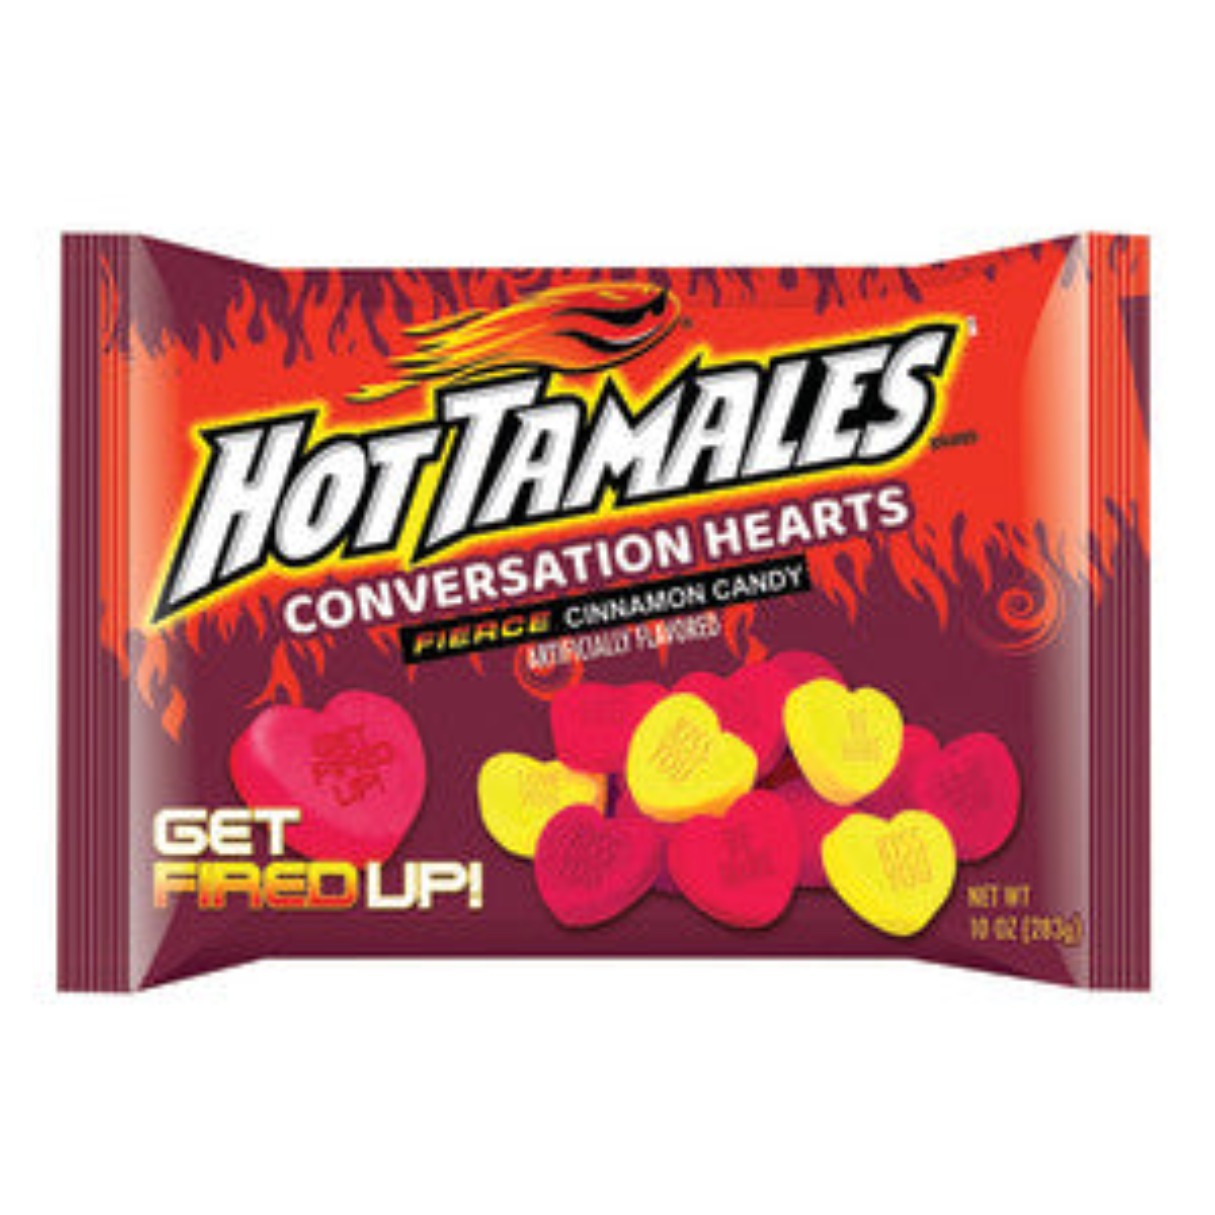 Hot Tamales Conversation Hearts Candy 10oz - 12ct